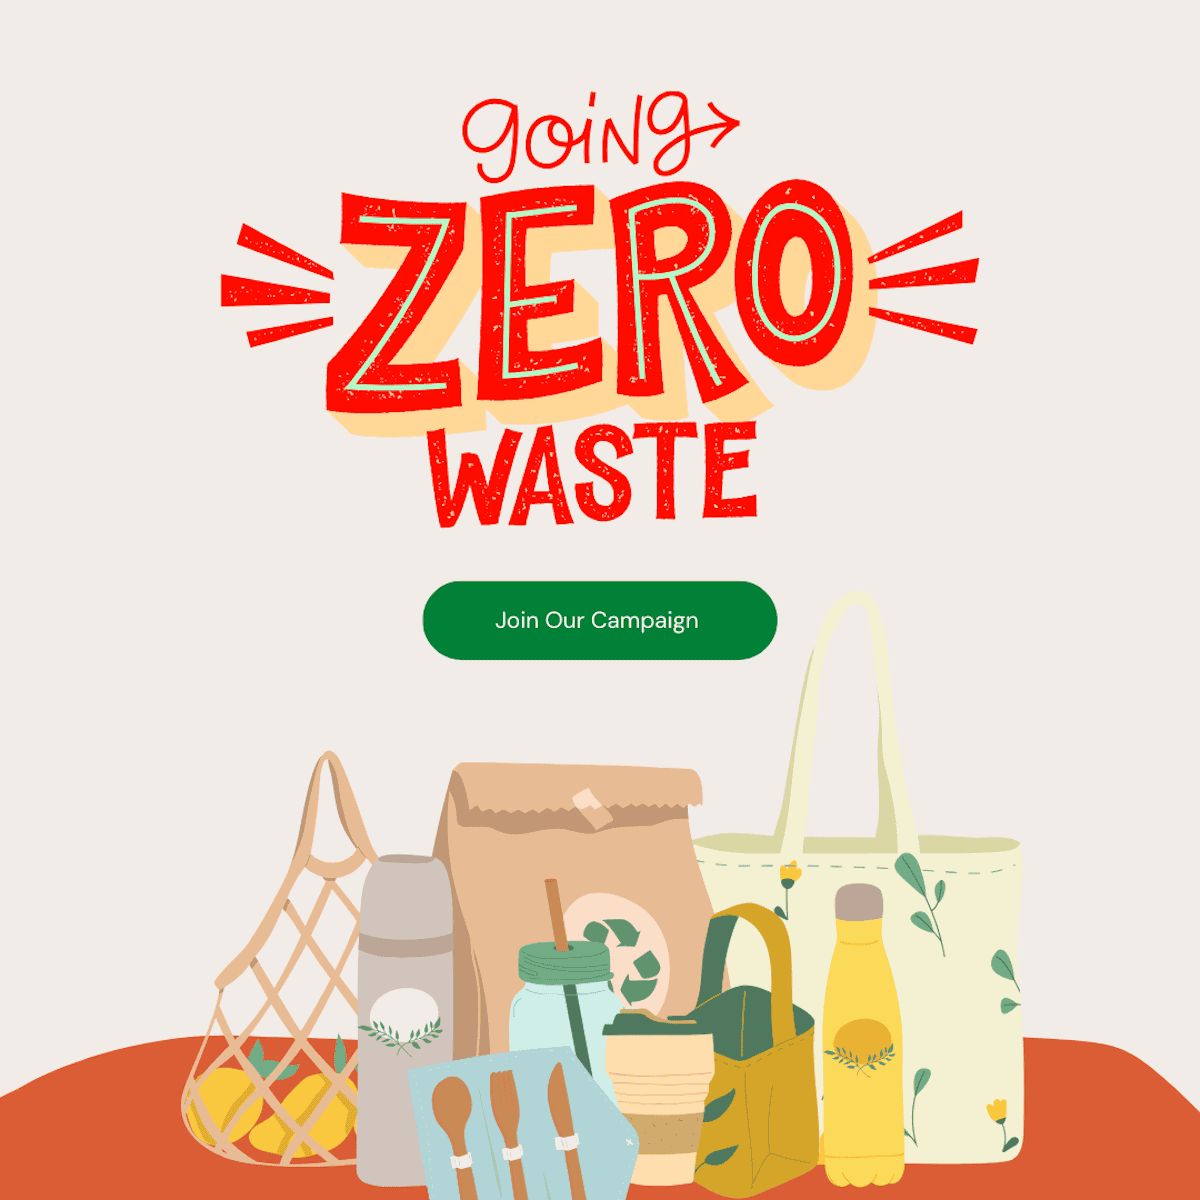 square cartoon image that reads "going zero waste, join our campaign" with drawn grocery bags.